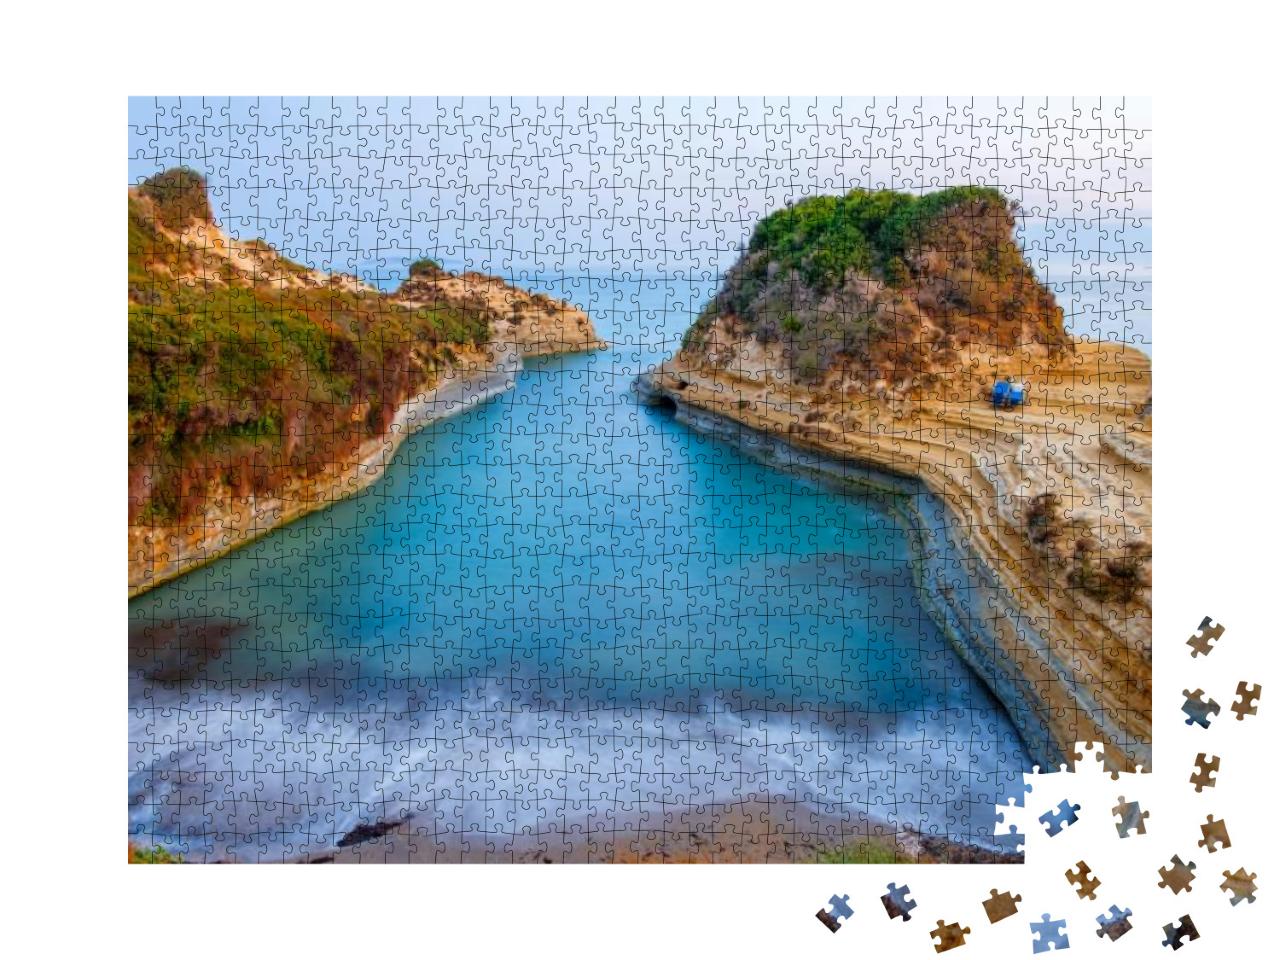 Famous Canal Damour Beach with Beautiful Rocky Coastline... Jigsaw Puzzle with 1000 pieces